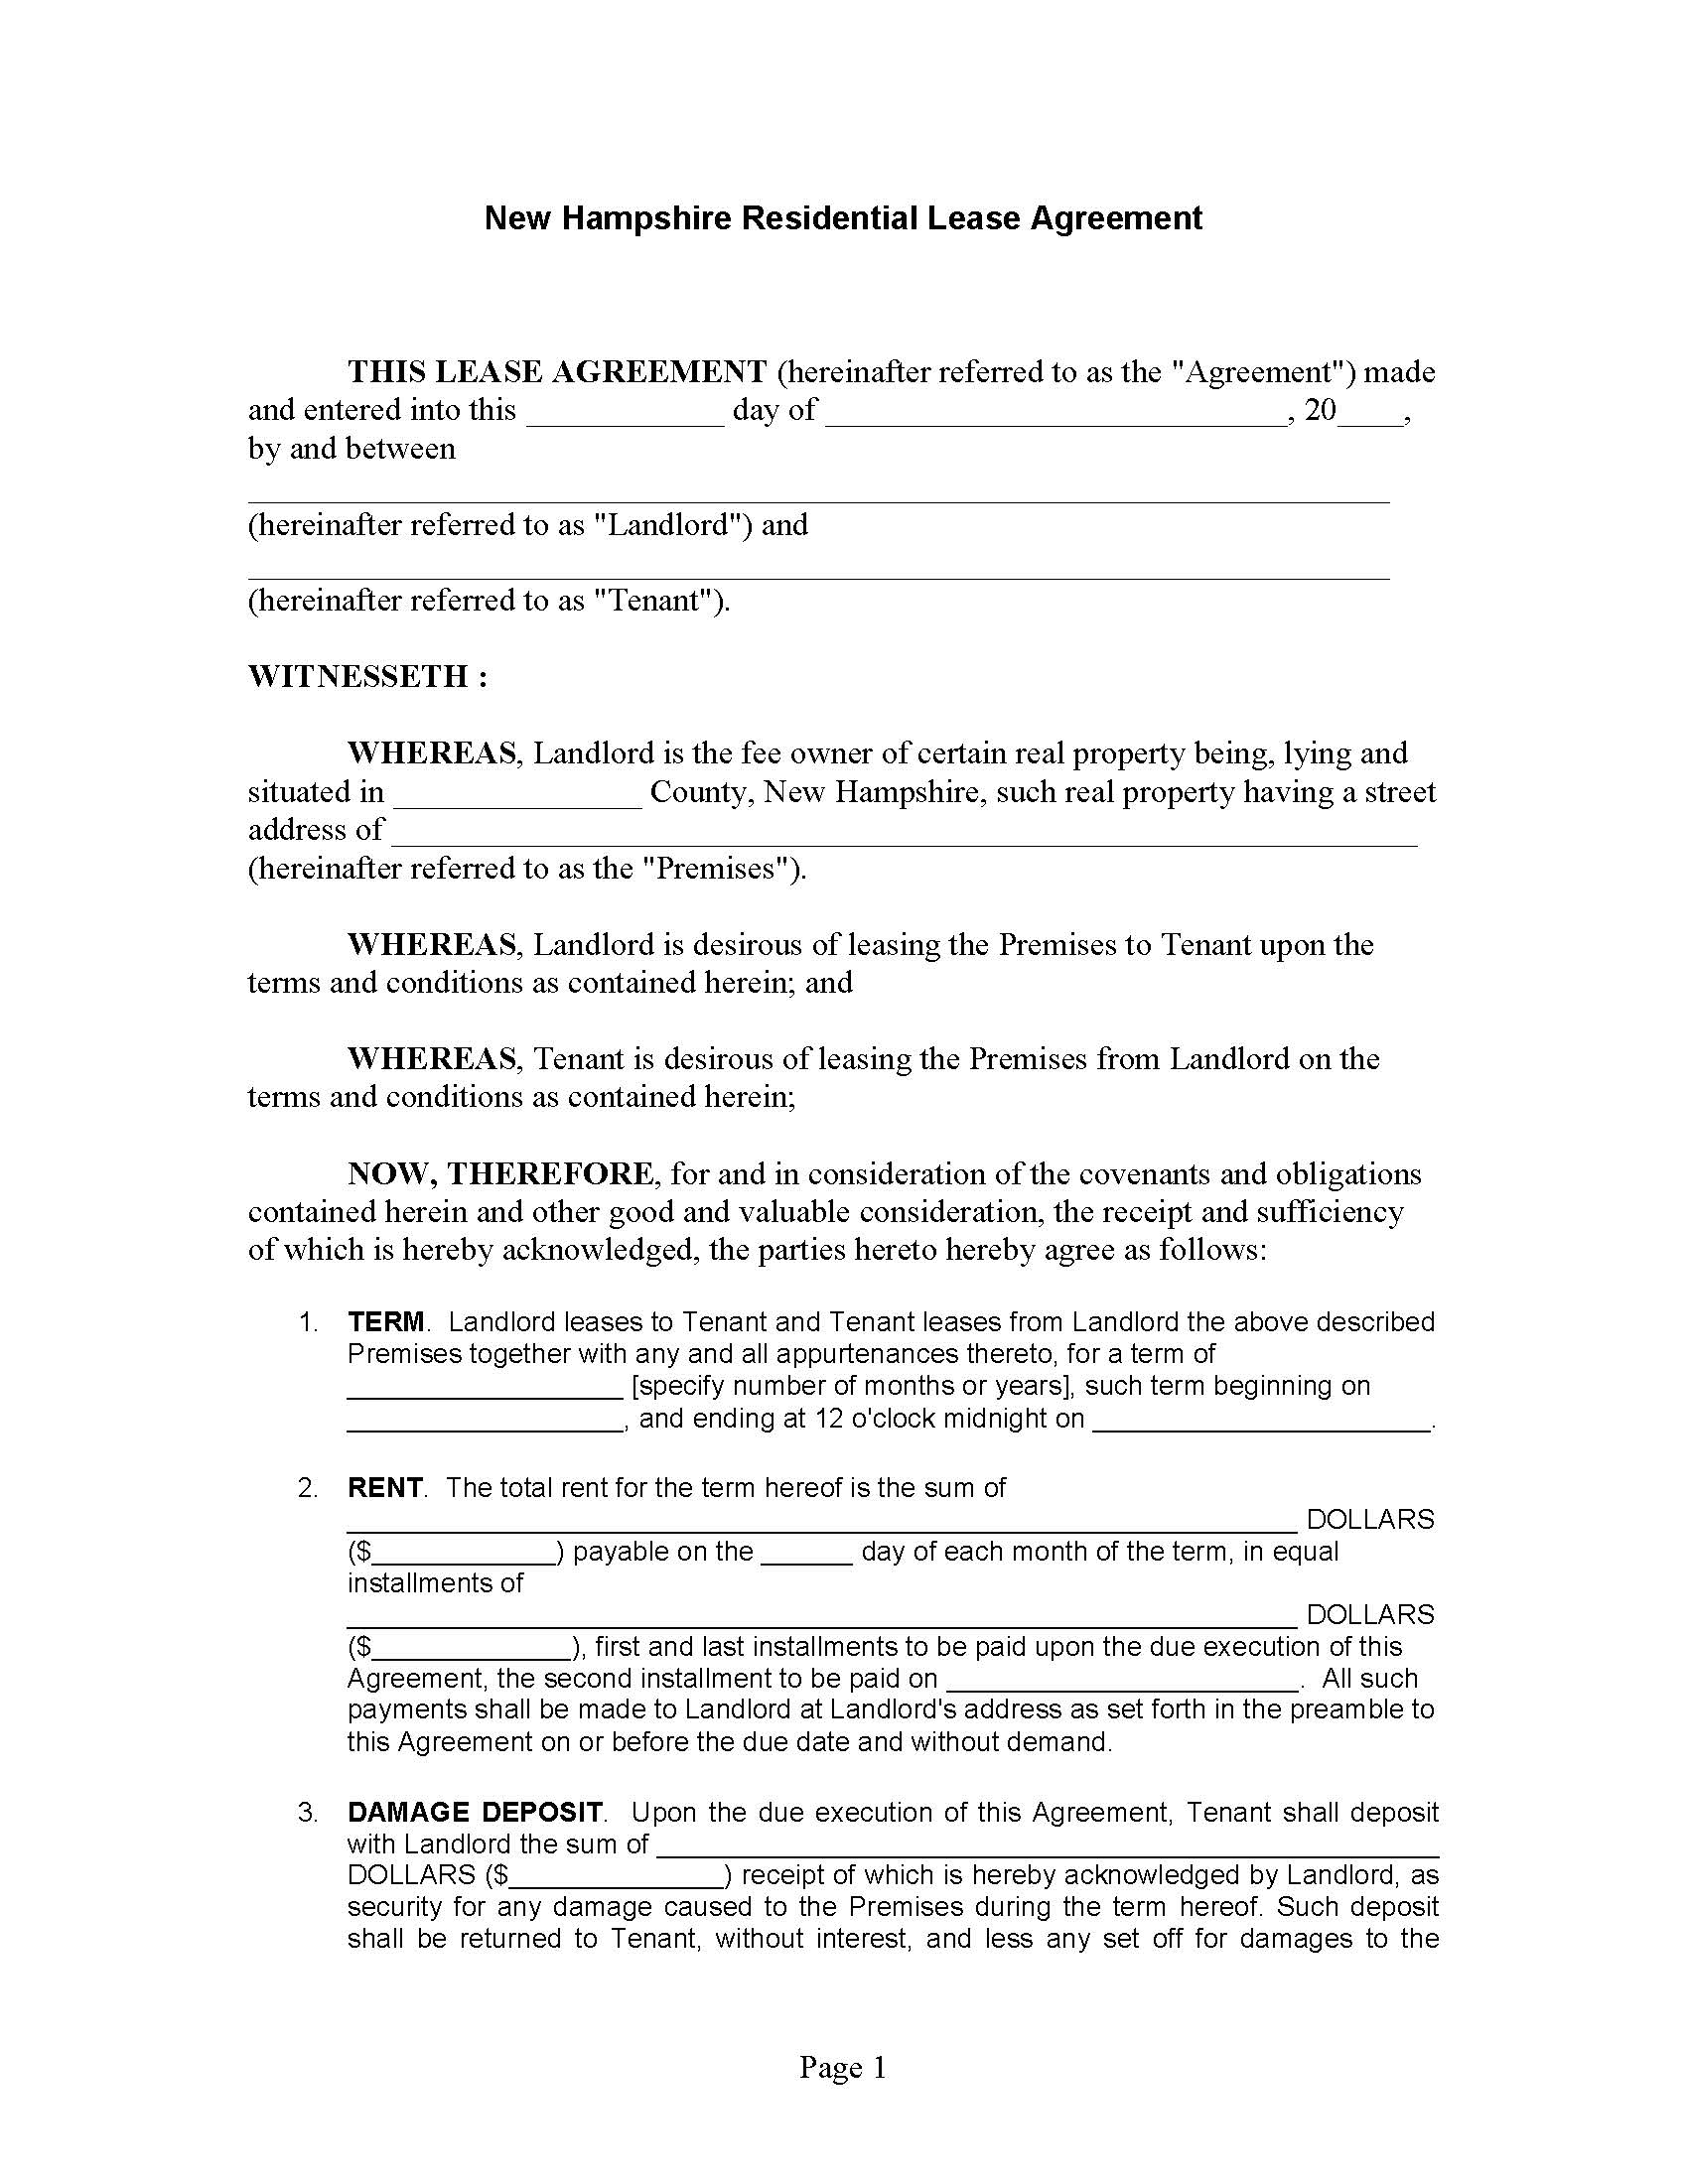 New Hampshire residential appliance installer license prep class download the new for mac